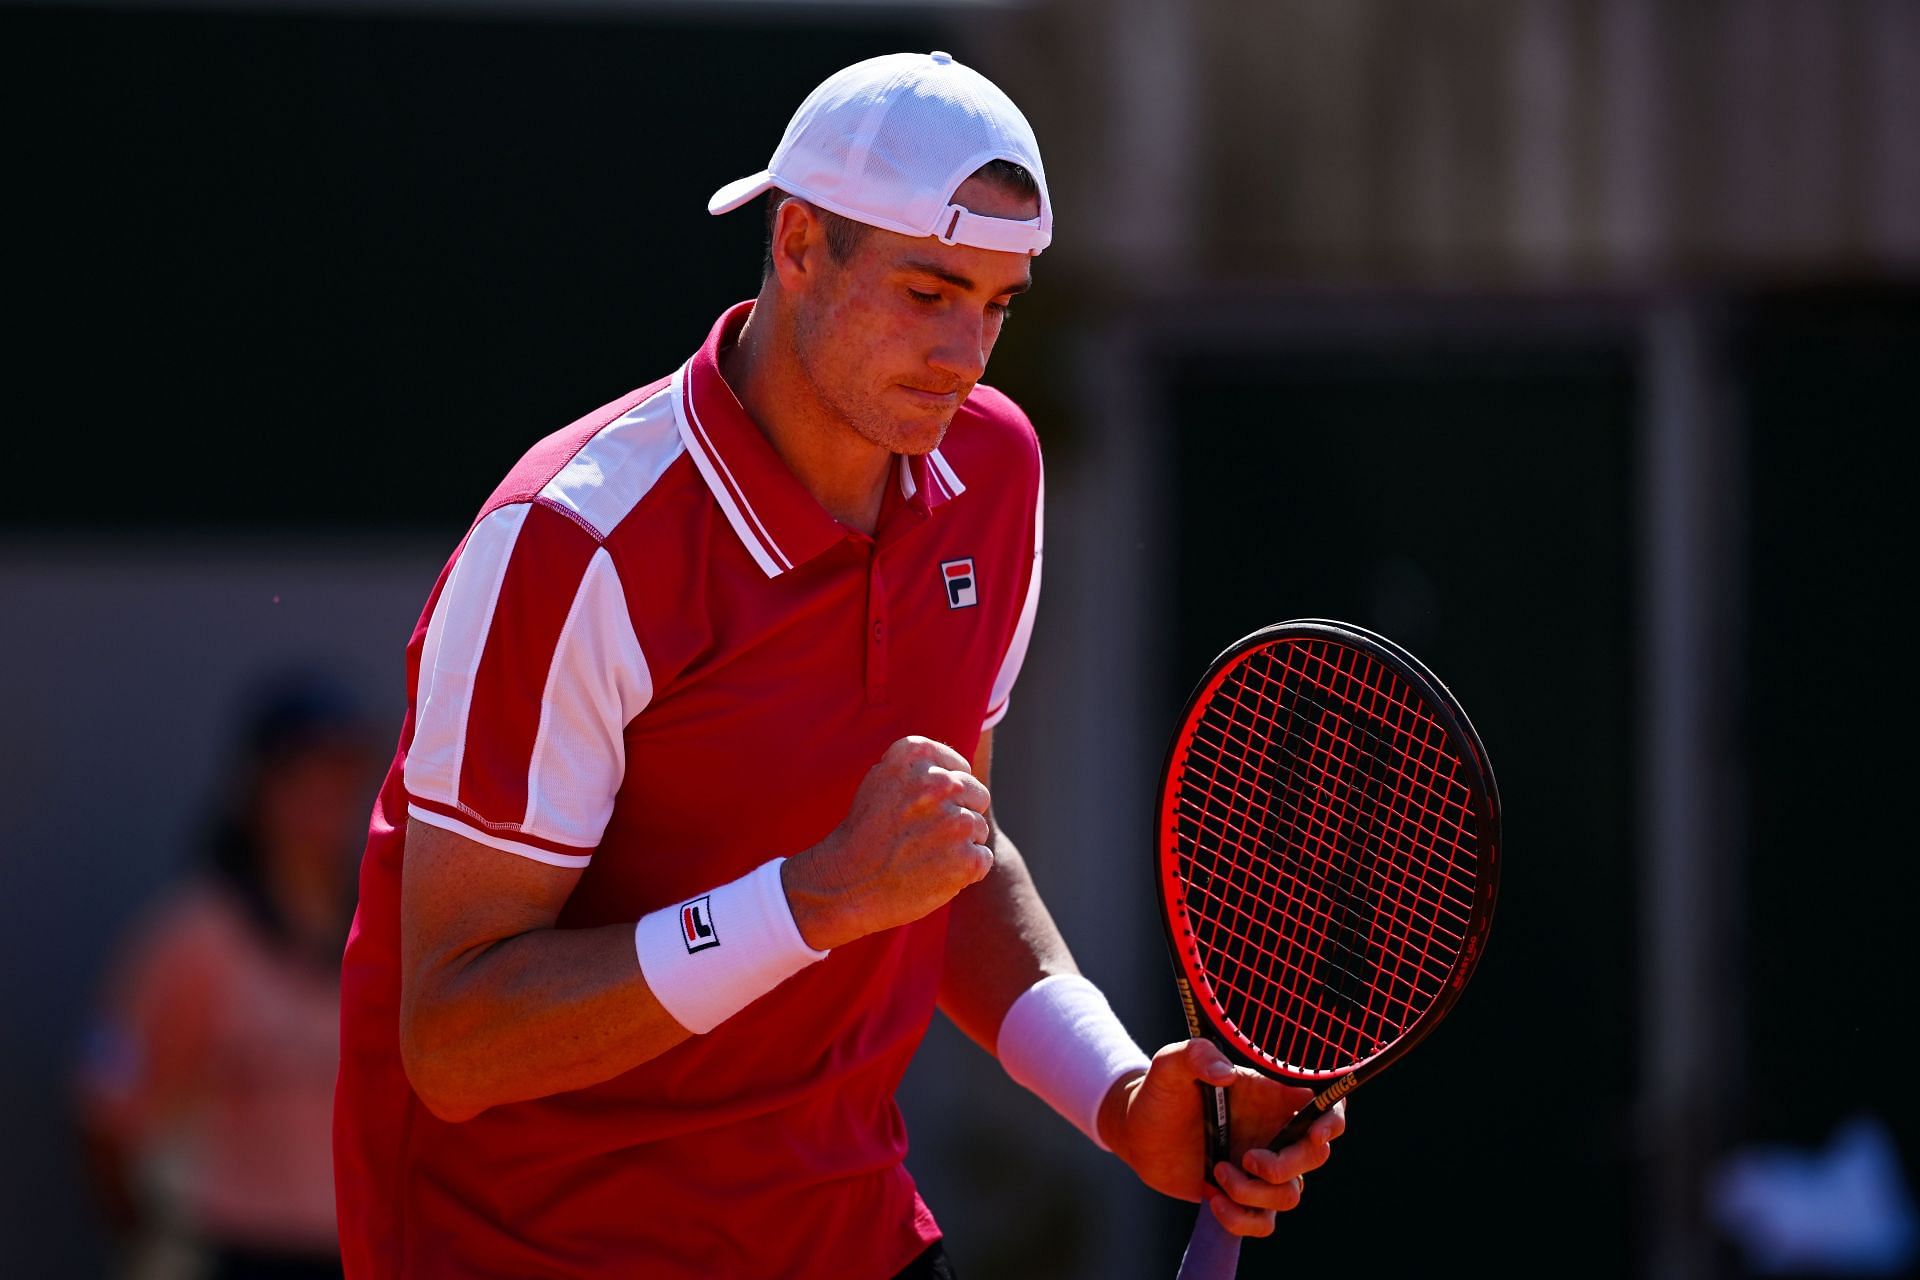 John Isner through to the QF in Newport